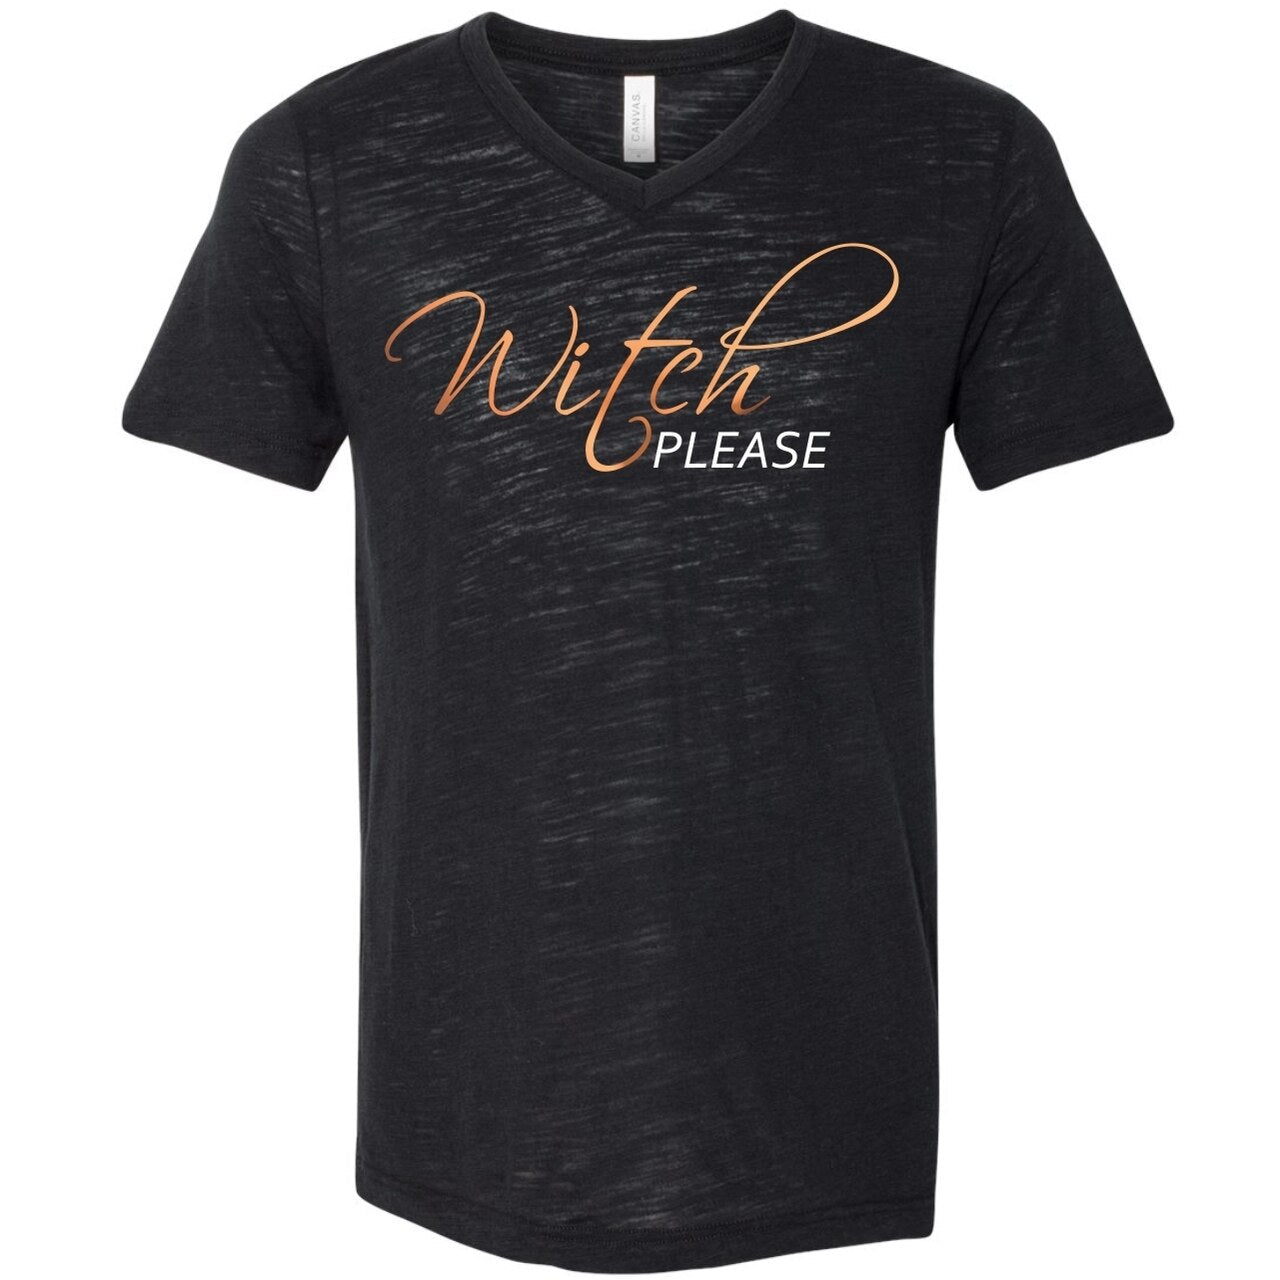 Witch Please-Black V-neck Tee - The Graphic Tee